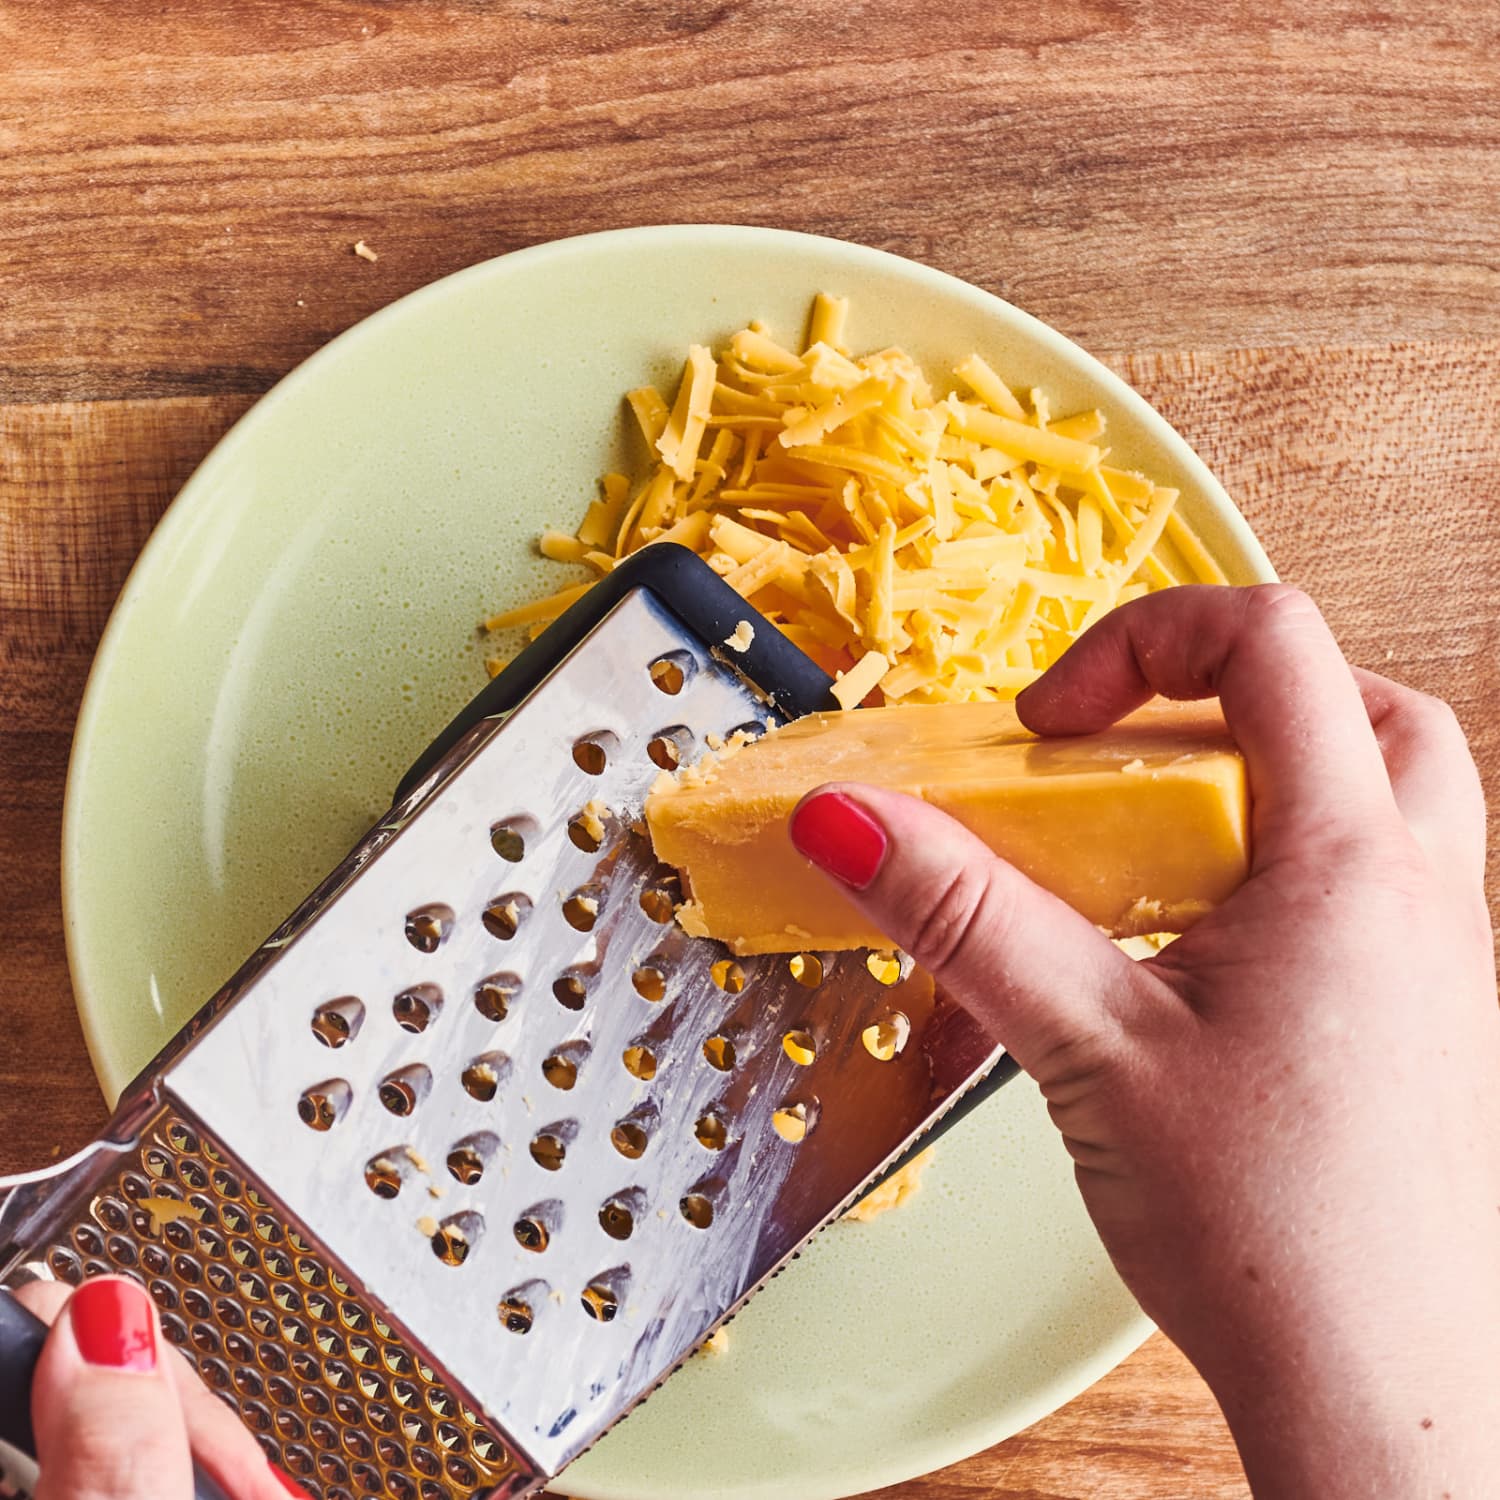 The right way to shred cheese with a cheese grater - Reviewed